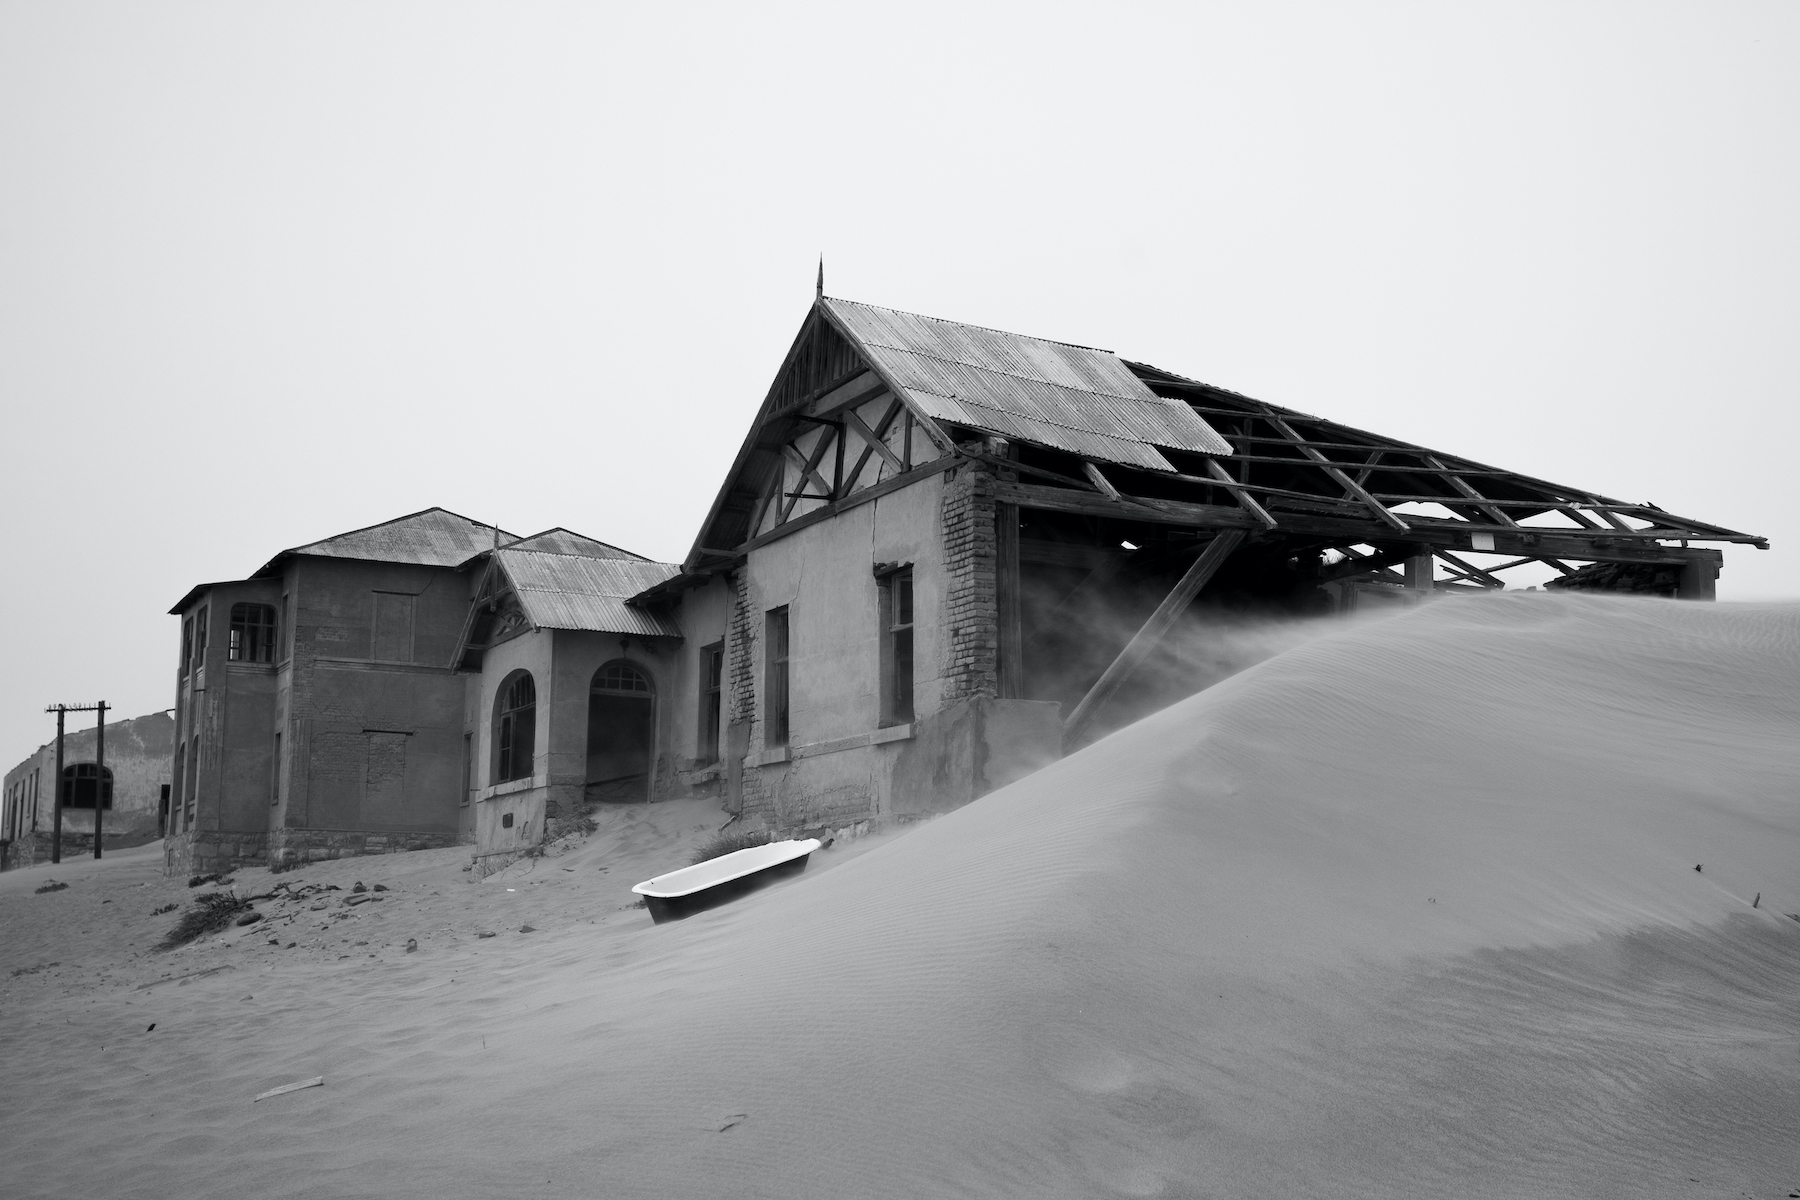 The ruined mining town of Kolmanskop on our photography tour of Namibia